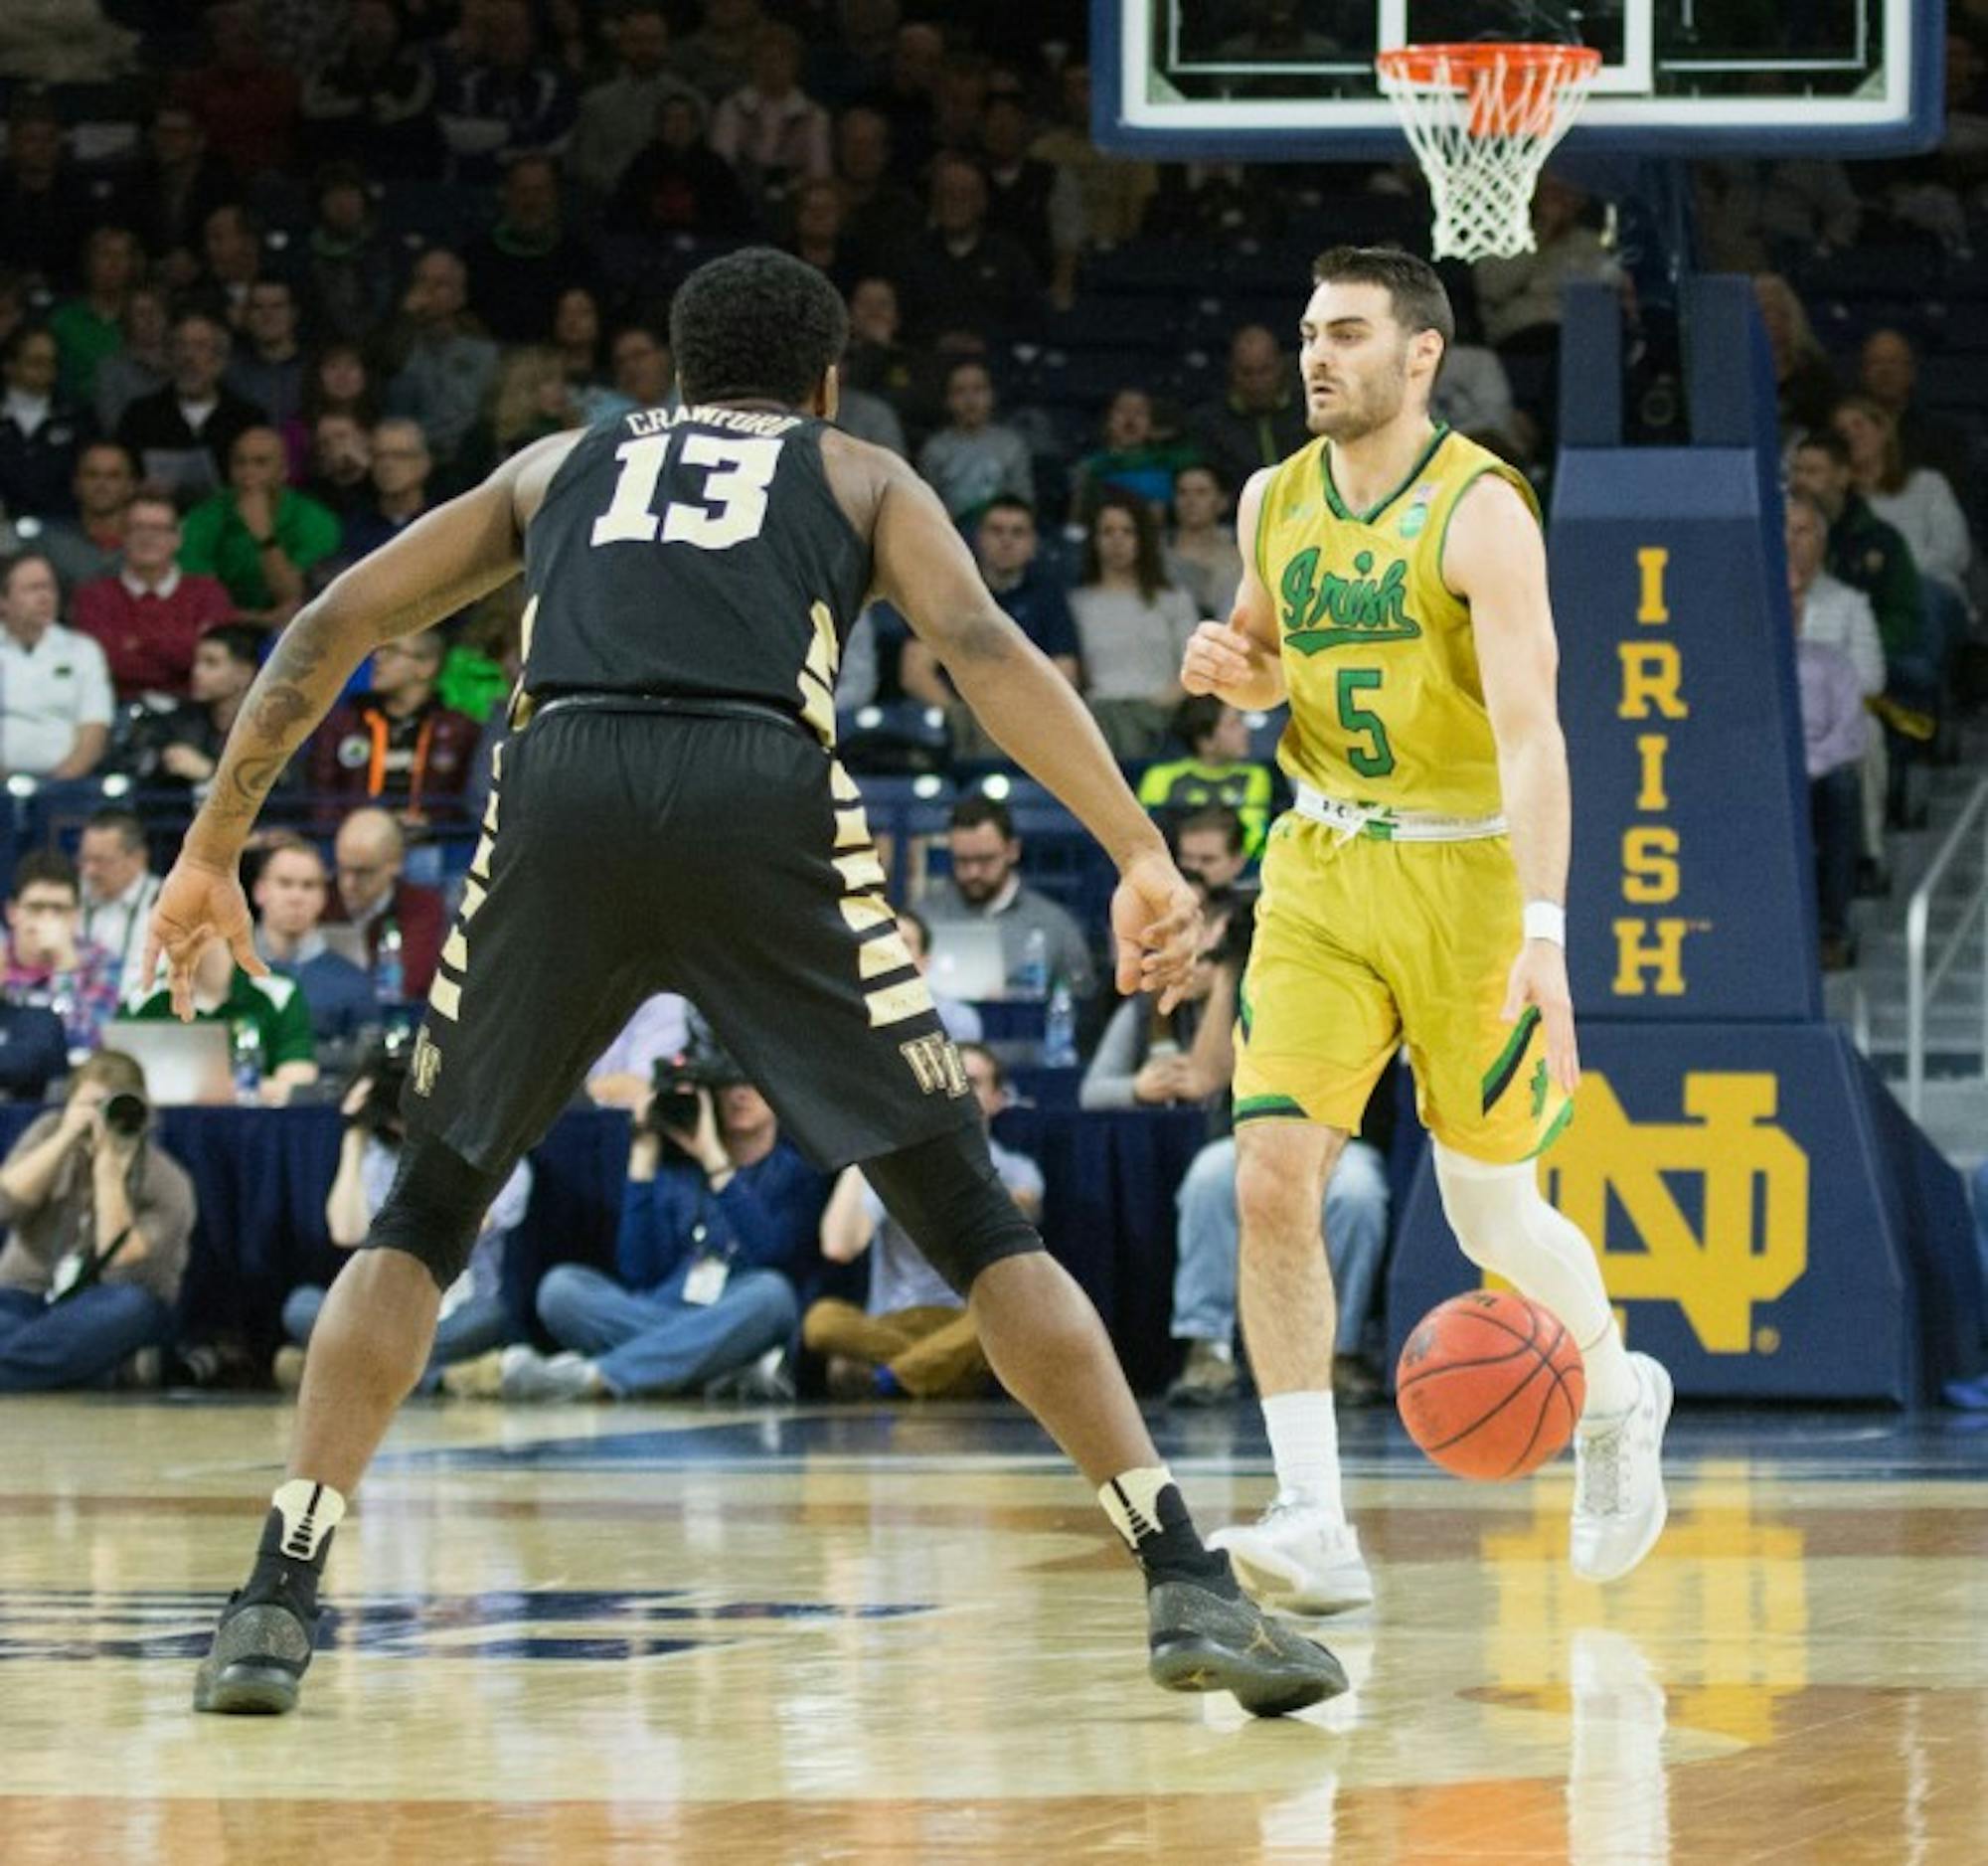 Irish junior guard Matt Farrell brings the ball across half court during Notre Dame’s 88-81 win over Wake Forest on Tuesday at Purcell Pavilion.